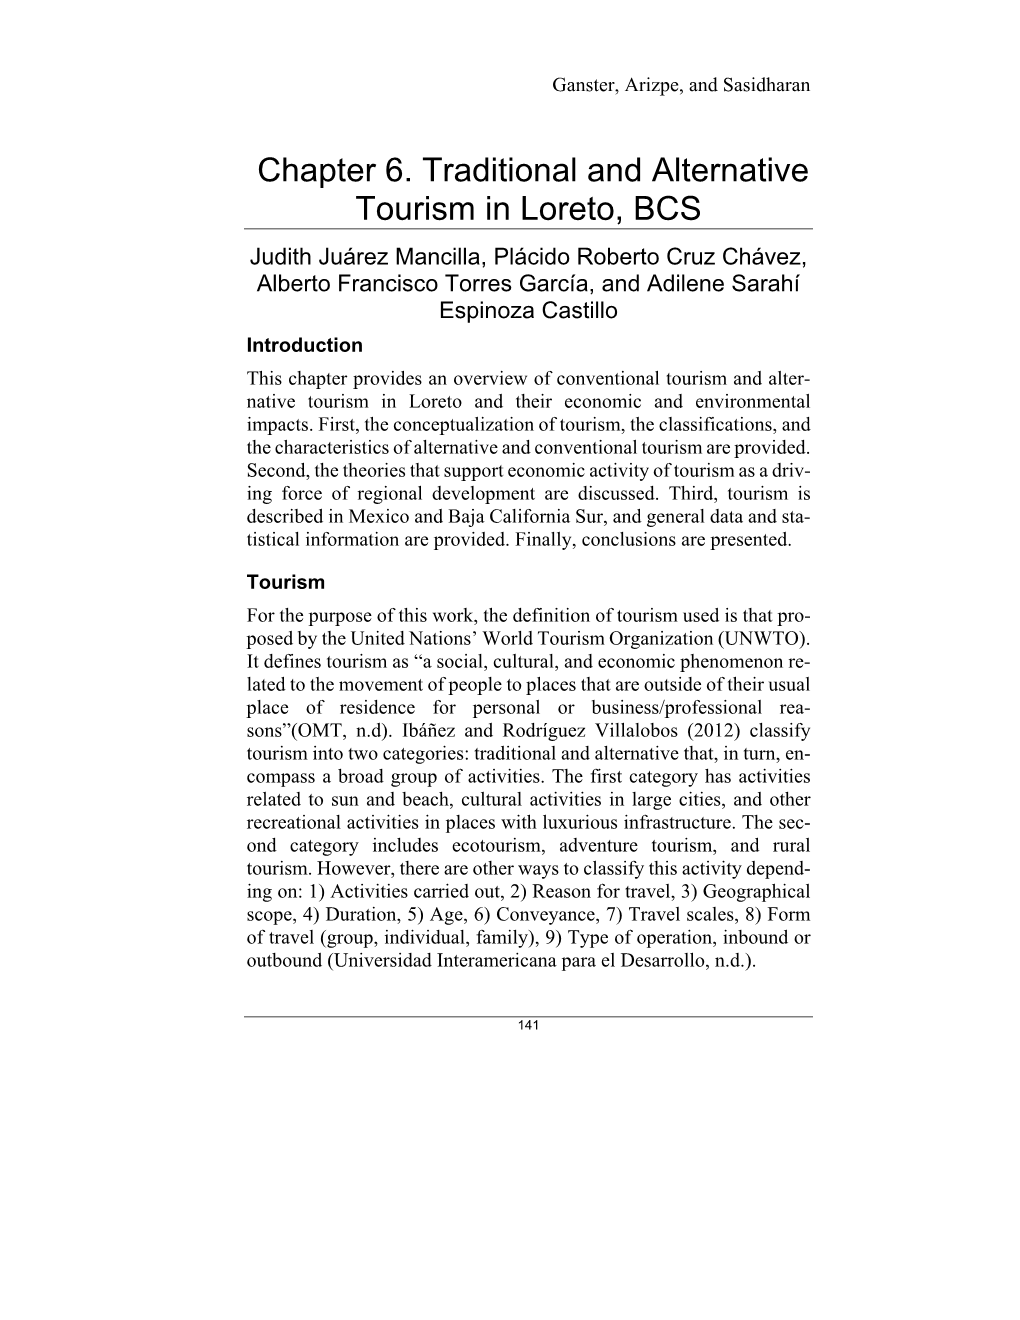 Chapter 6. Traditional and Alternative Tourism in Loreto